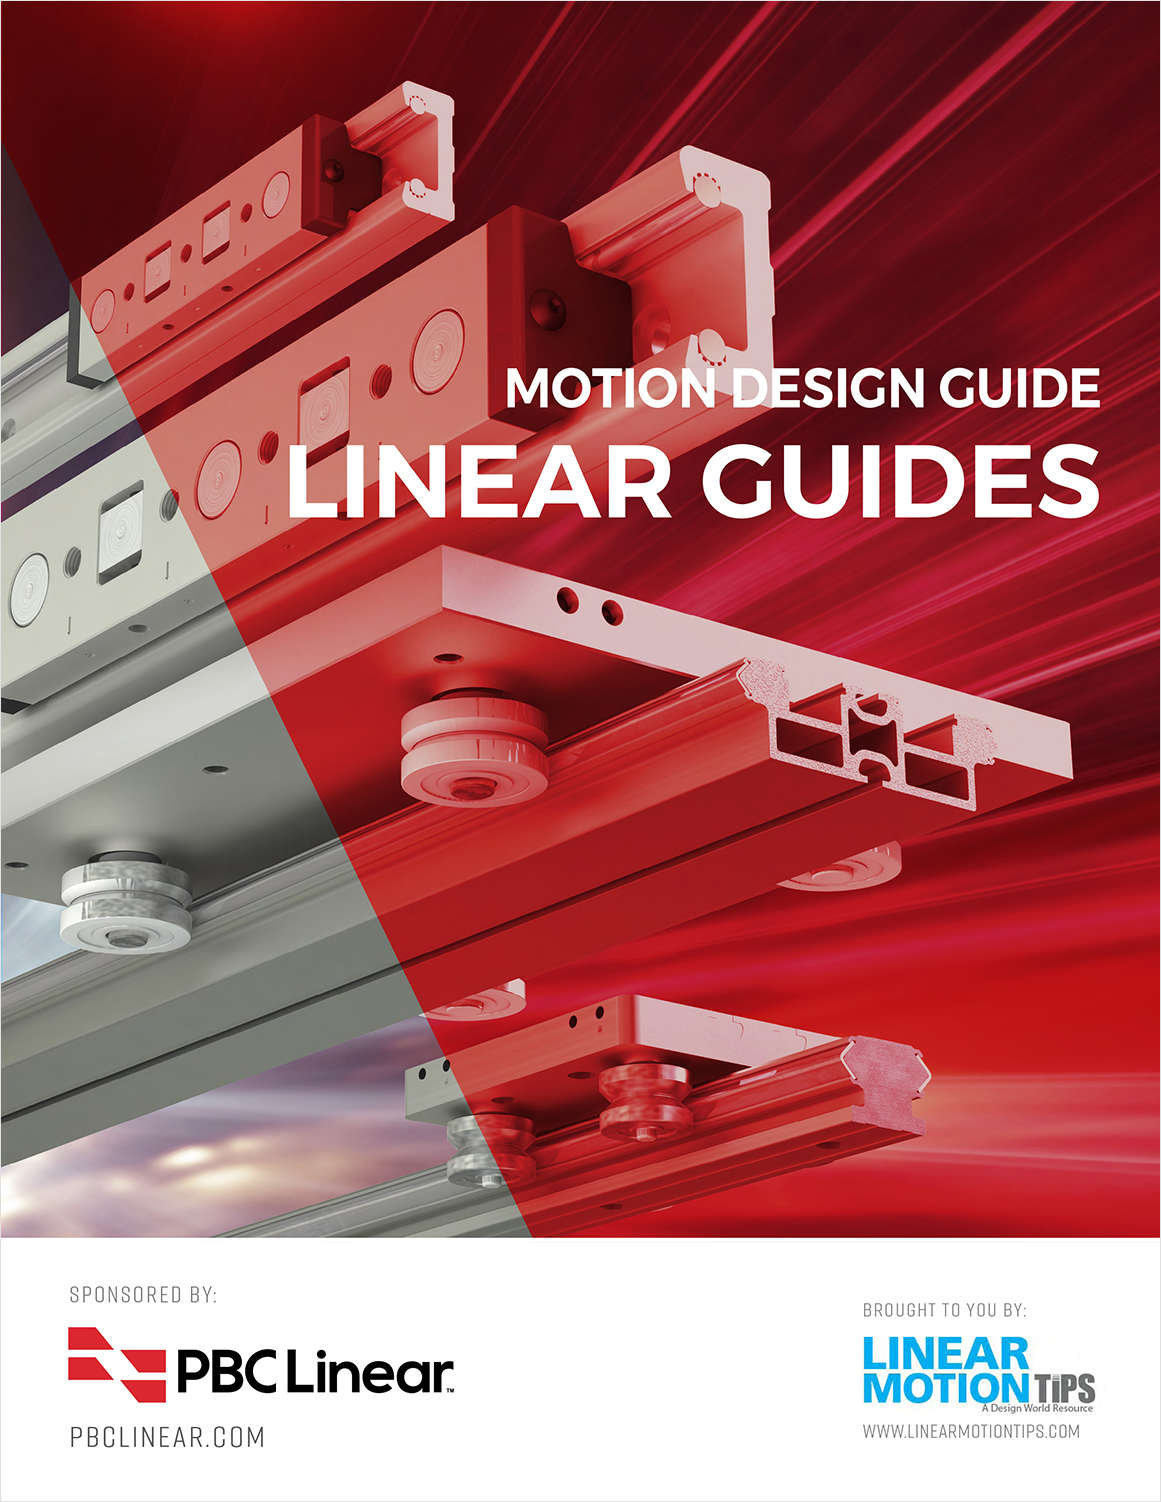 Design Guide on Track-Roller Linear Guides